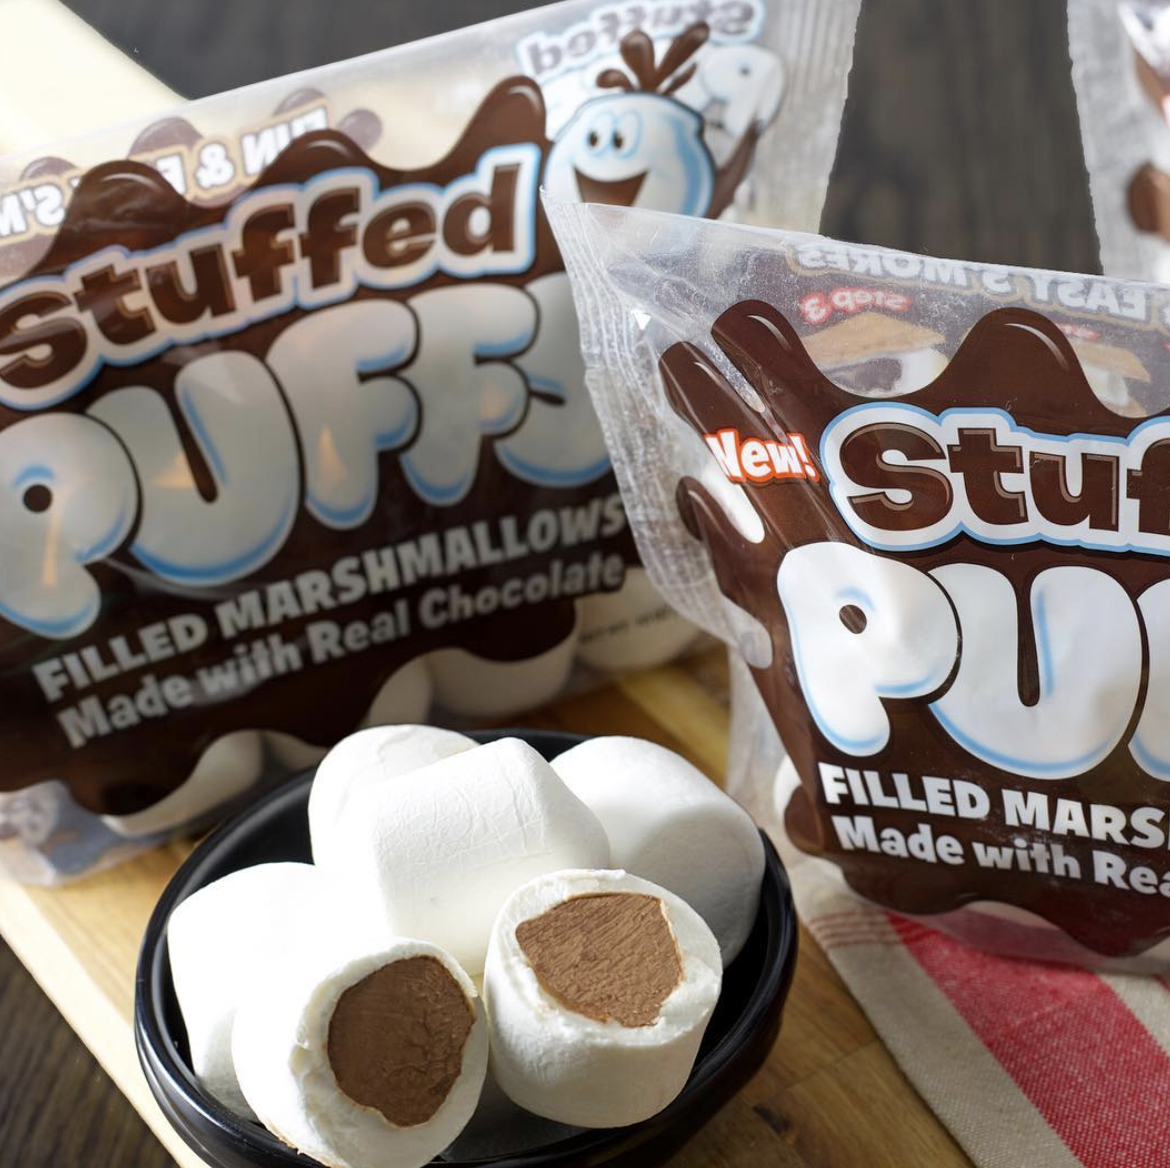 Stuffed Puffs Are Marshmallows With Chocolate On The Inside